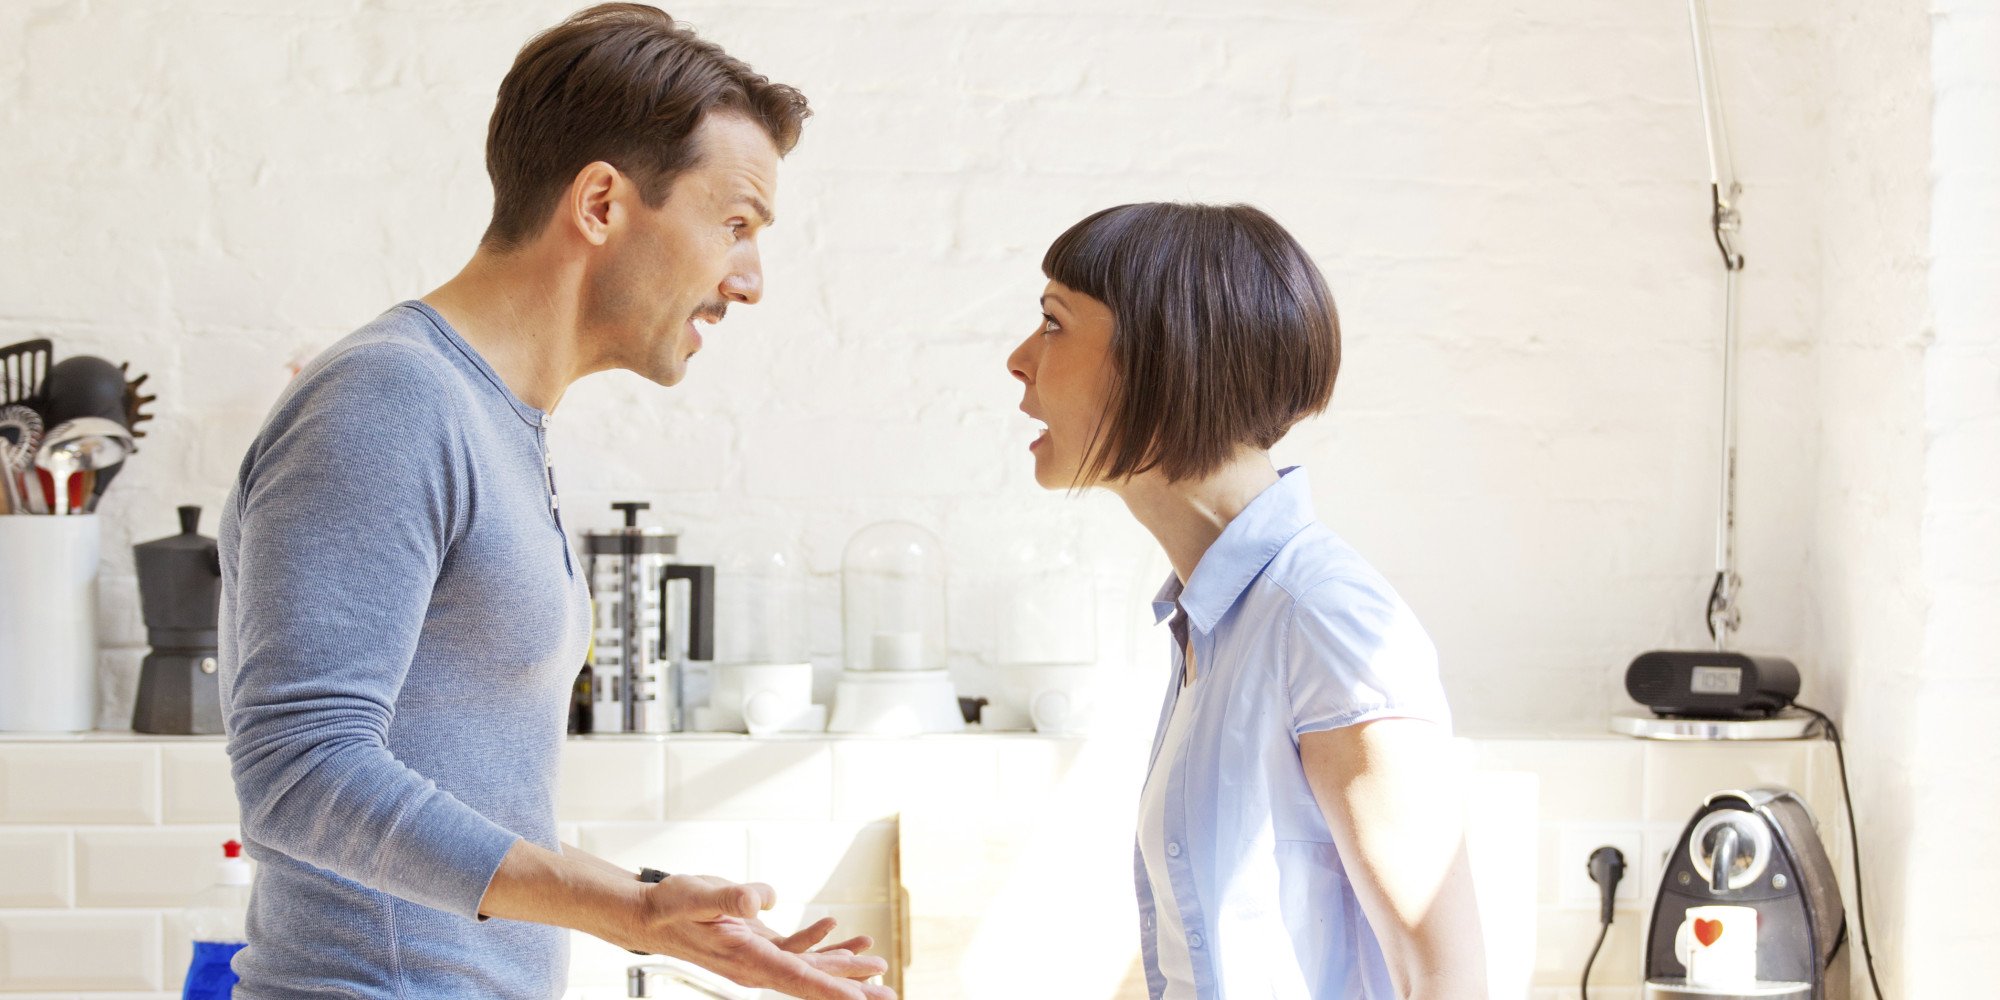 Couple screaming at each other in a kitchen